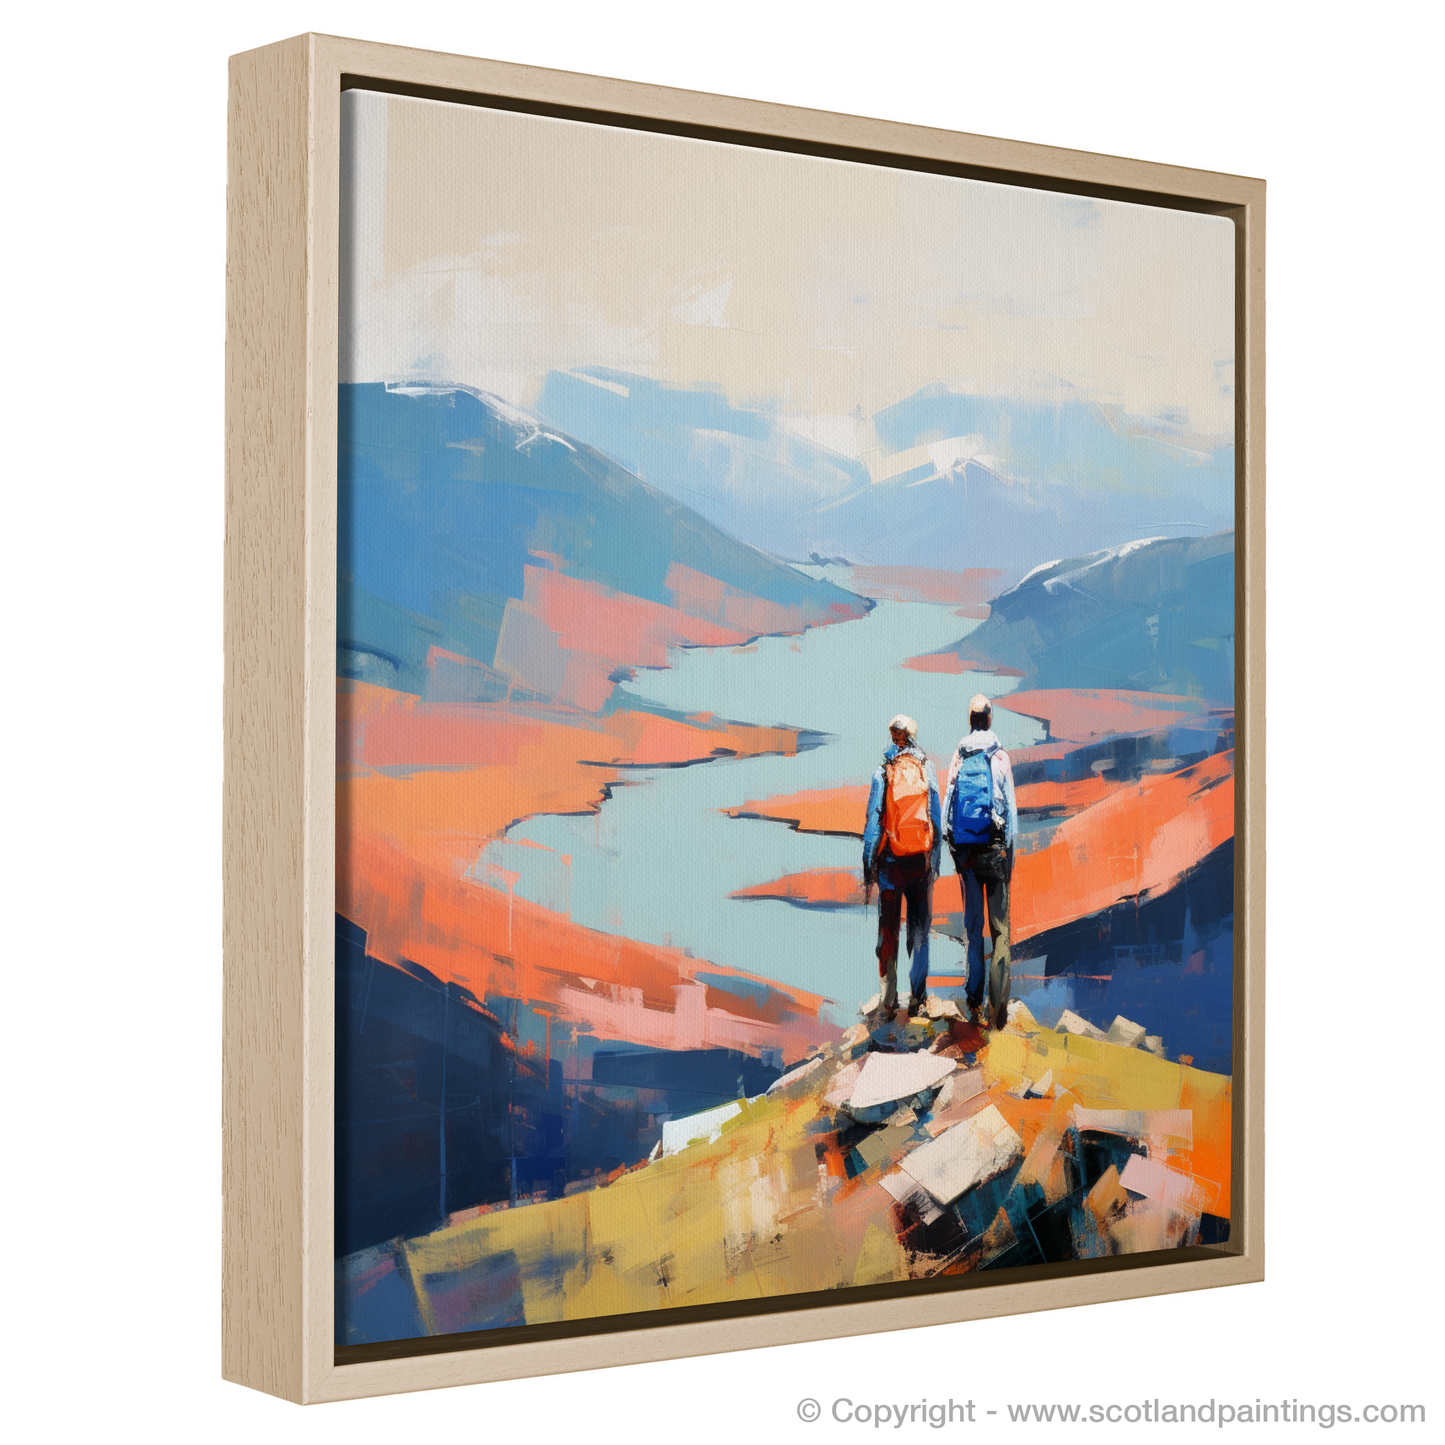 Painting and Art Print of Two hikers looking out on Loch Lomond entitled "Summit Spectacle over Loch Lomond".